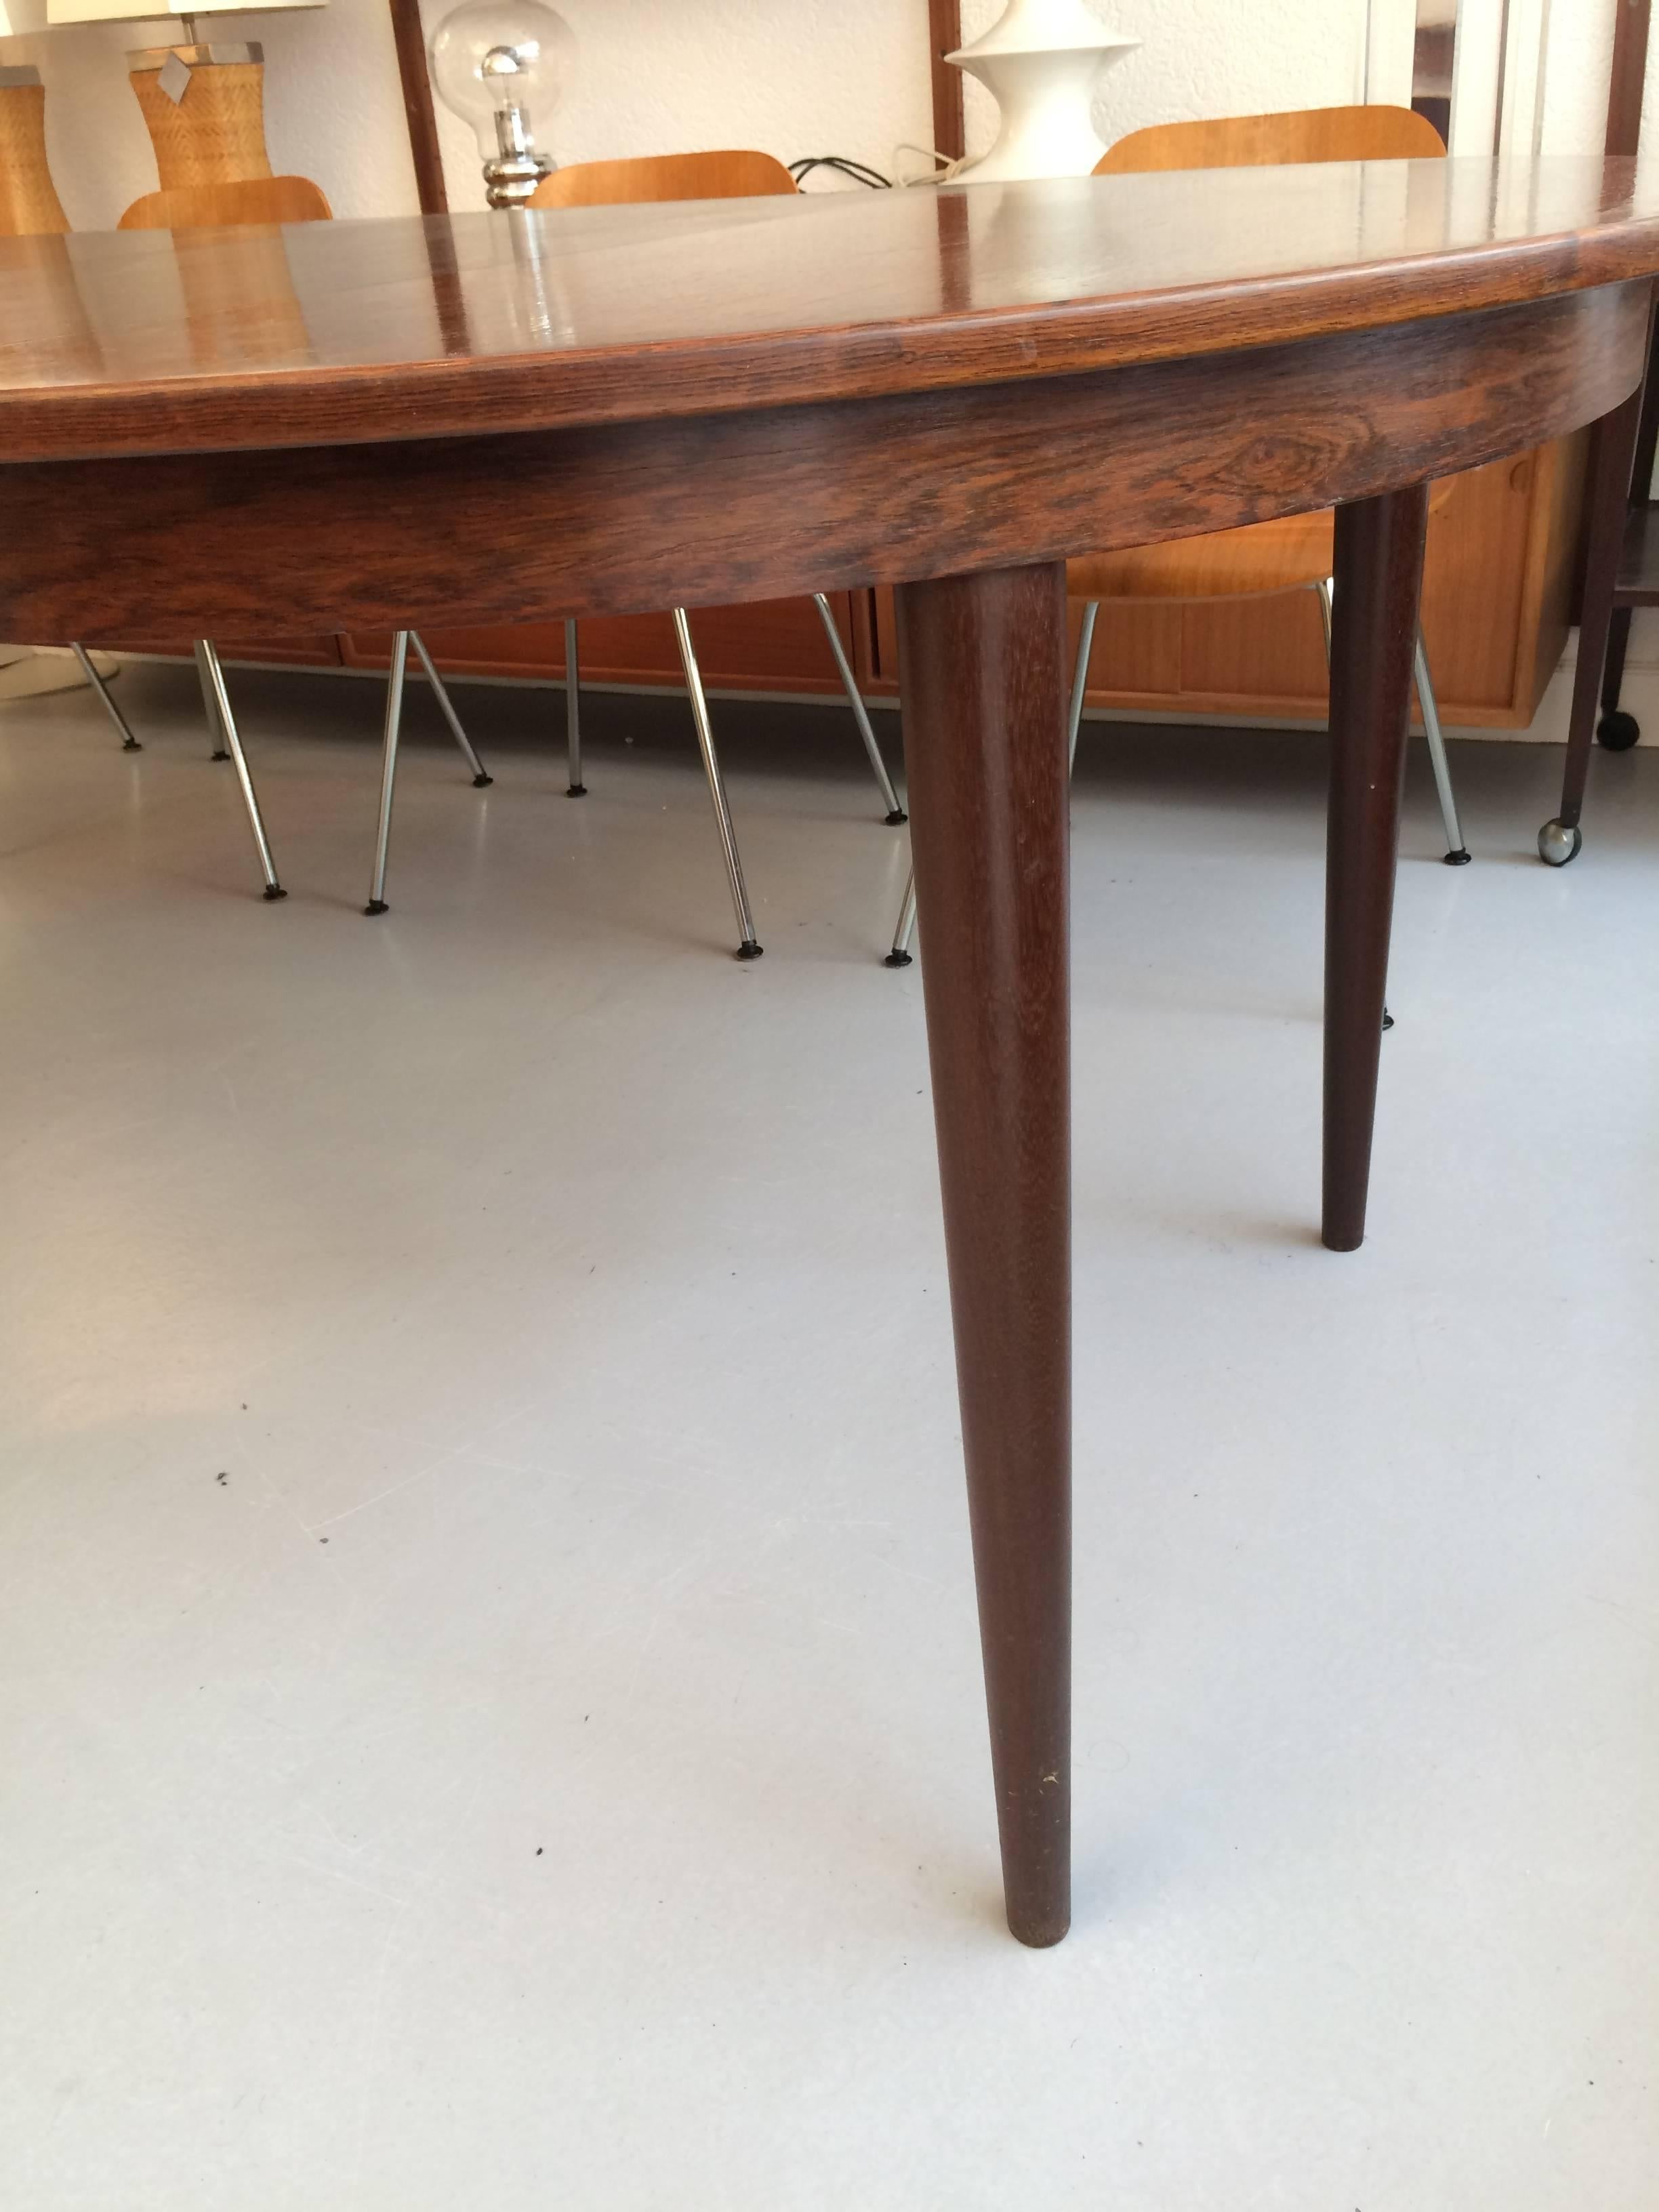 Danish Rosewood Dining Table 1